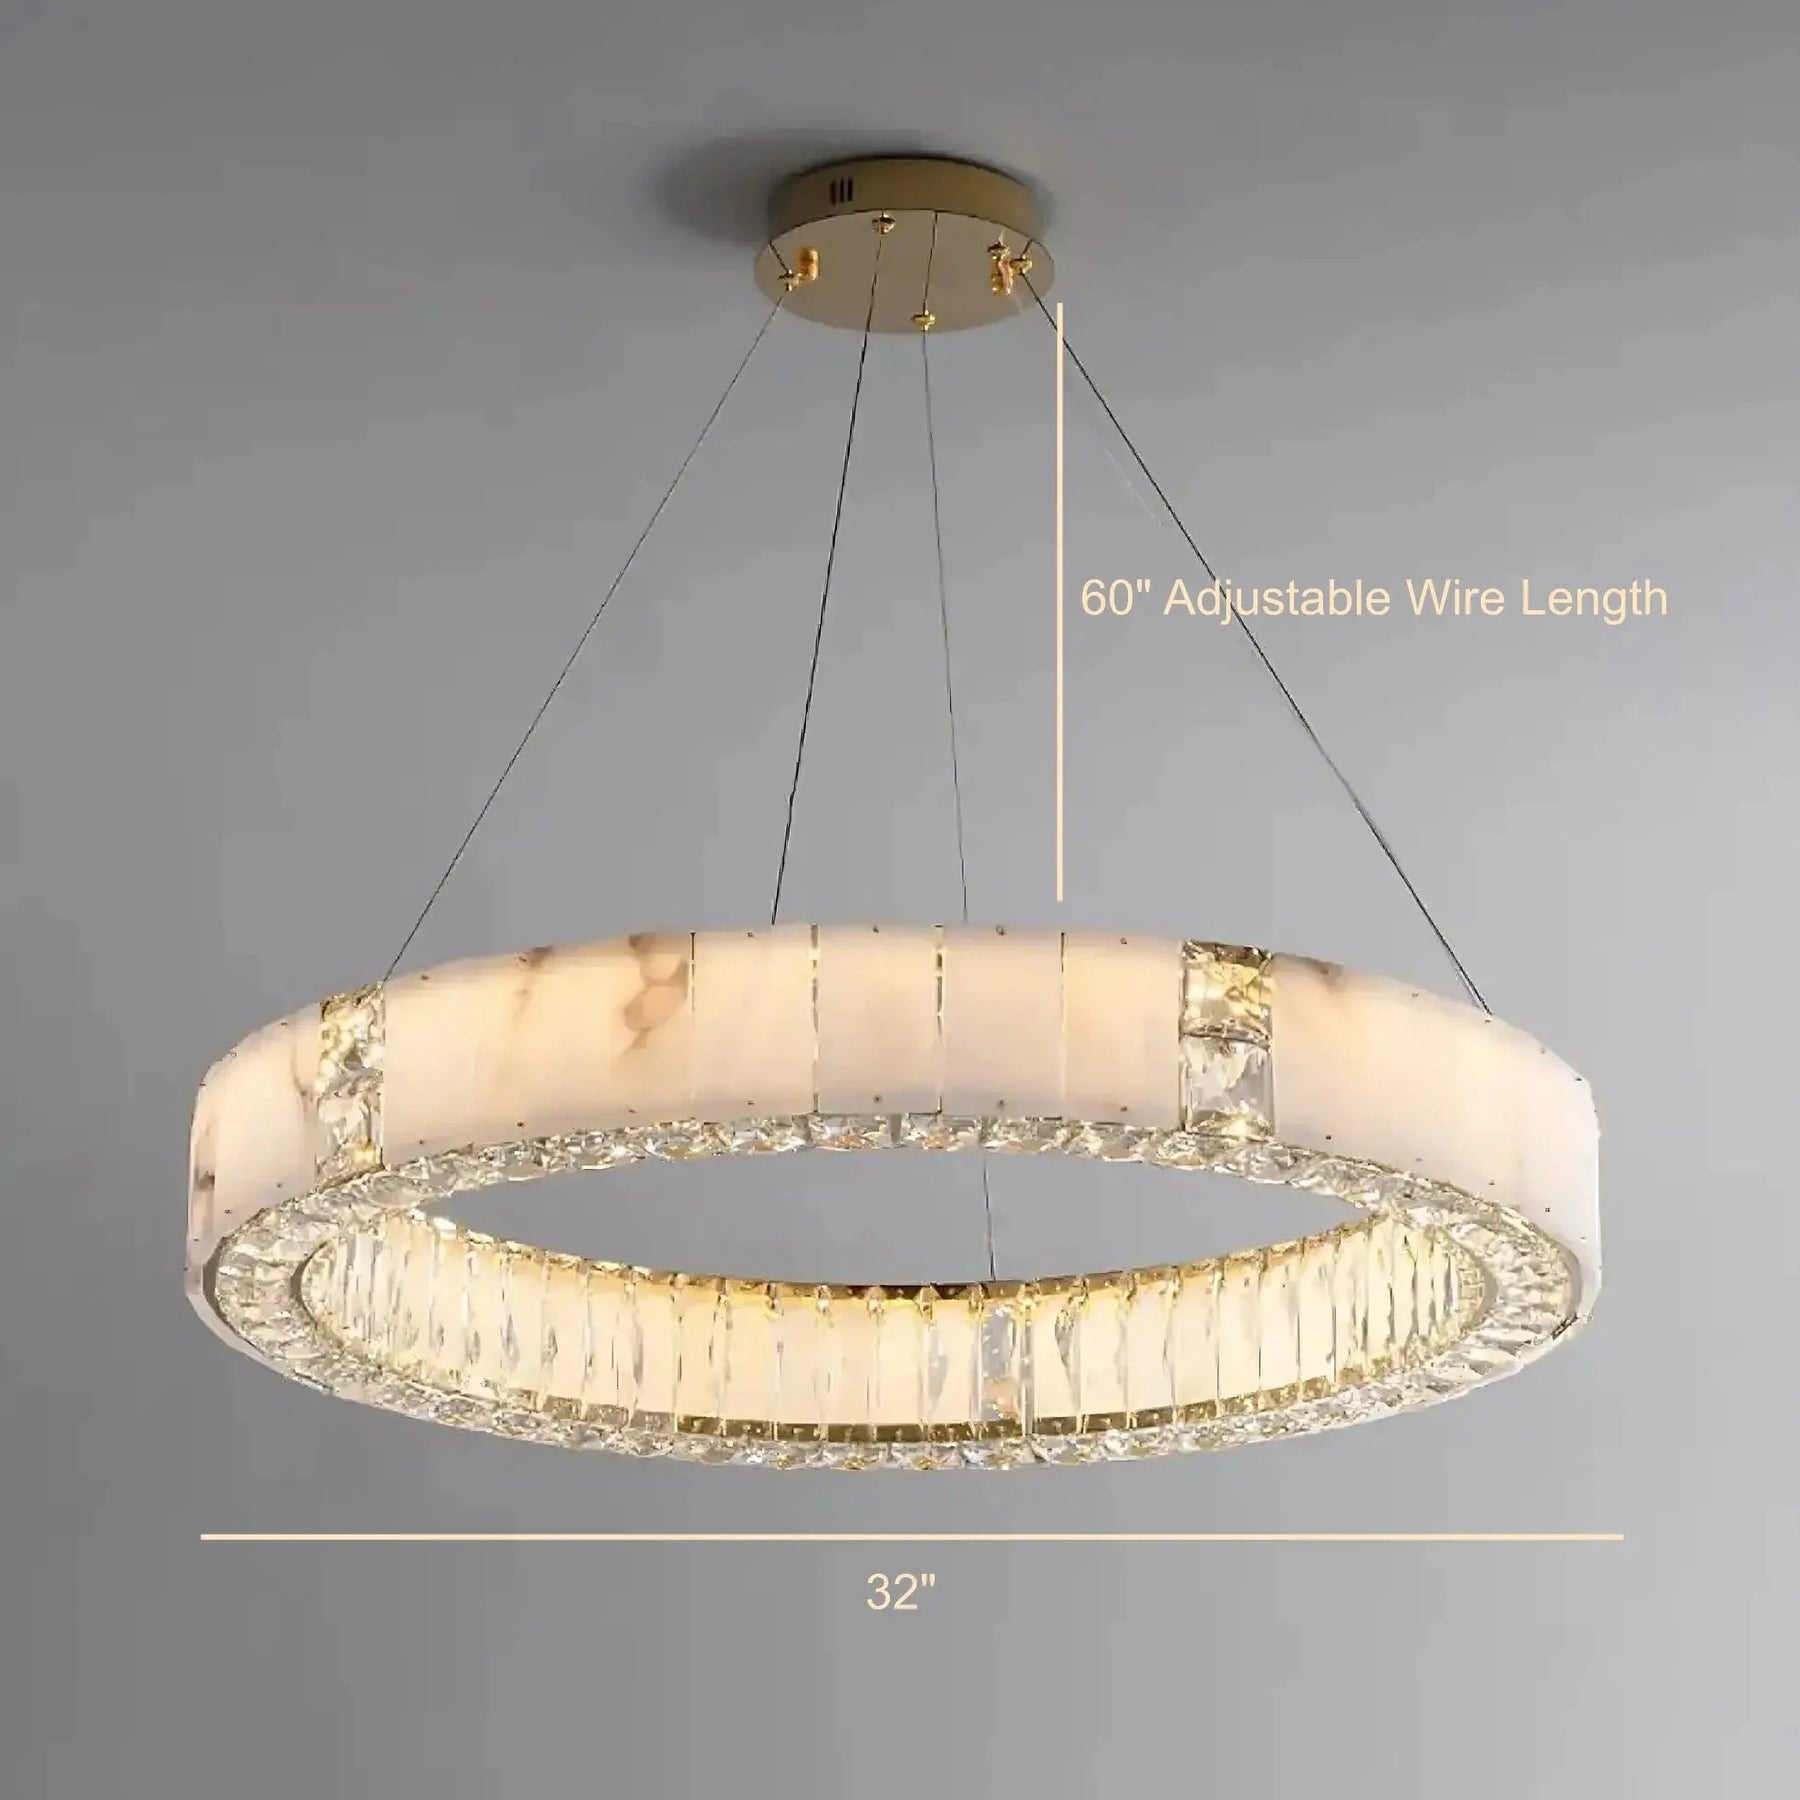 A circular chandelier with a modern design featuring a 32-inch diameter. It has a white and gold color scheme, with a translucent ring encircled by crystal-like elements. This Natural Marble & Crystal Modern Ceiling Light Fixture by Morsale.com hangs from the ceiling with adjustable wires, measured at 60 inches in length.